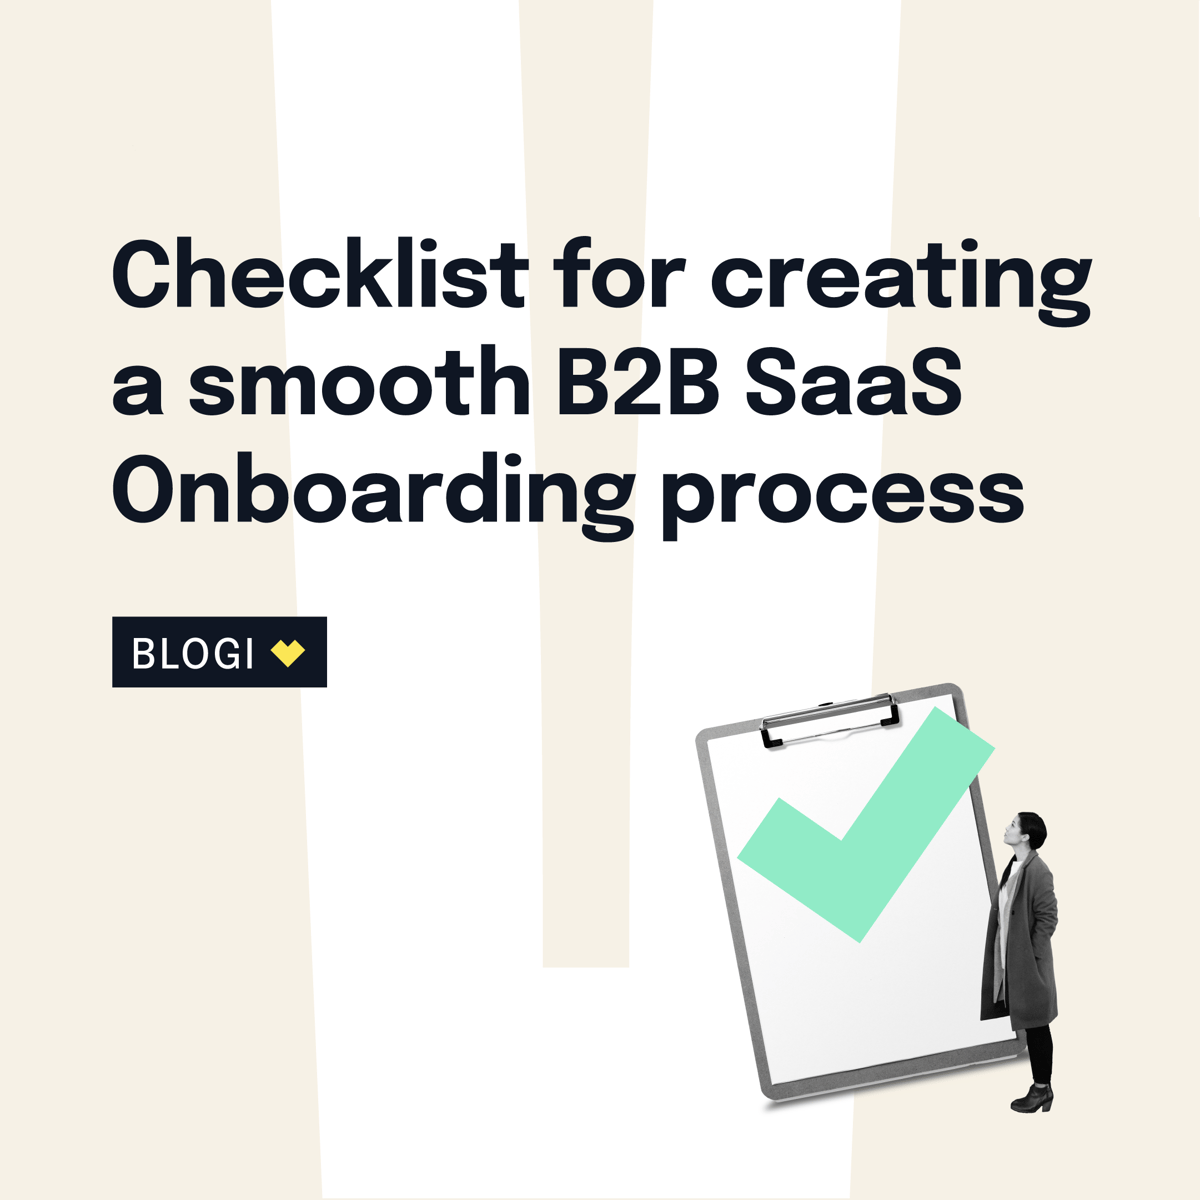 Checklist for creating a smooth B2B SaaS Onboarding process